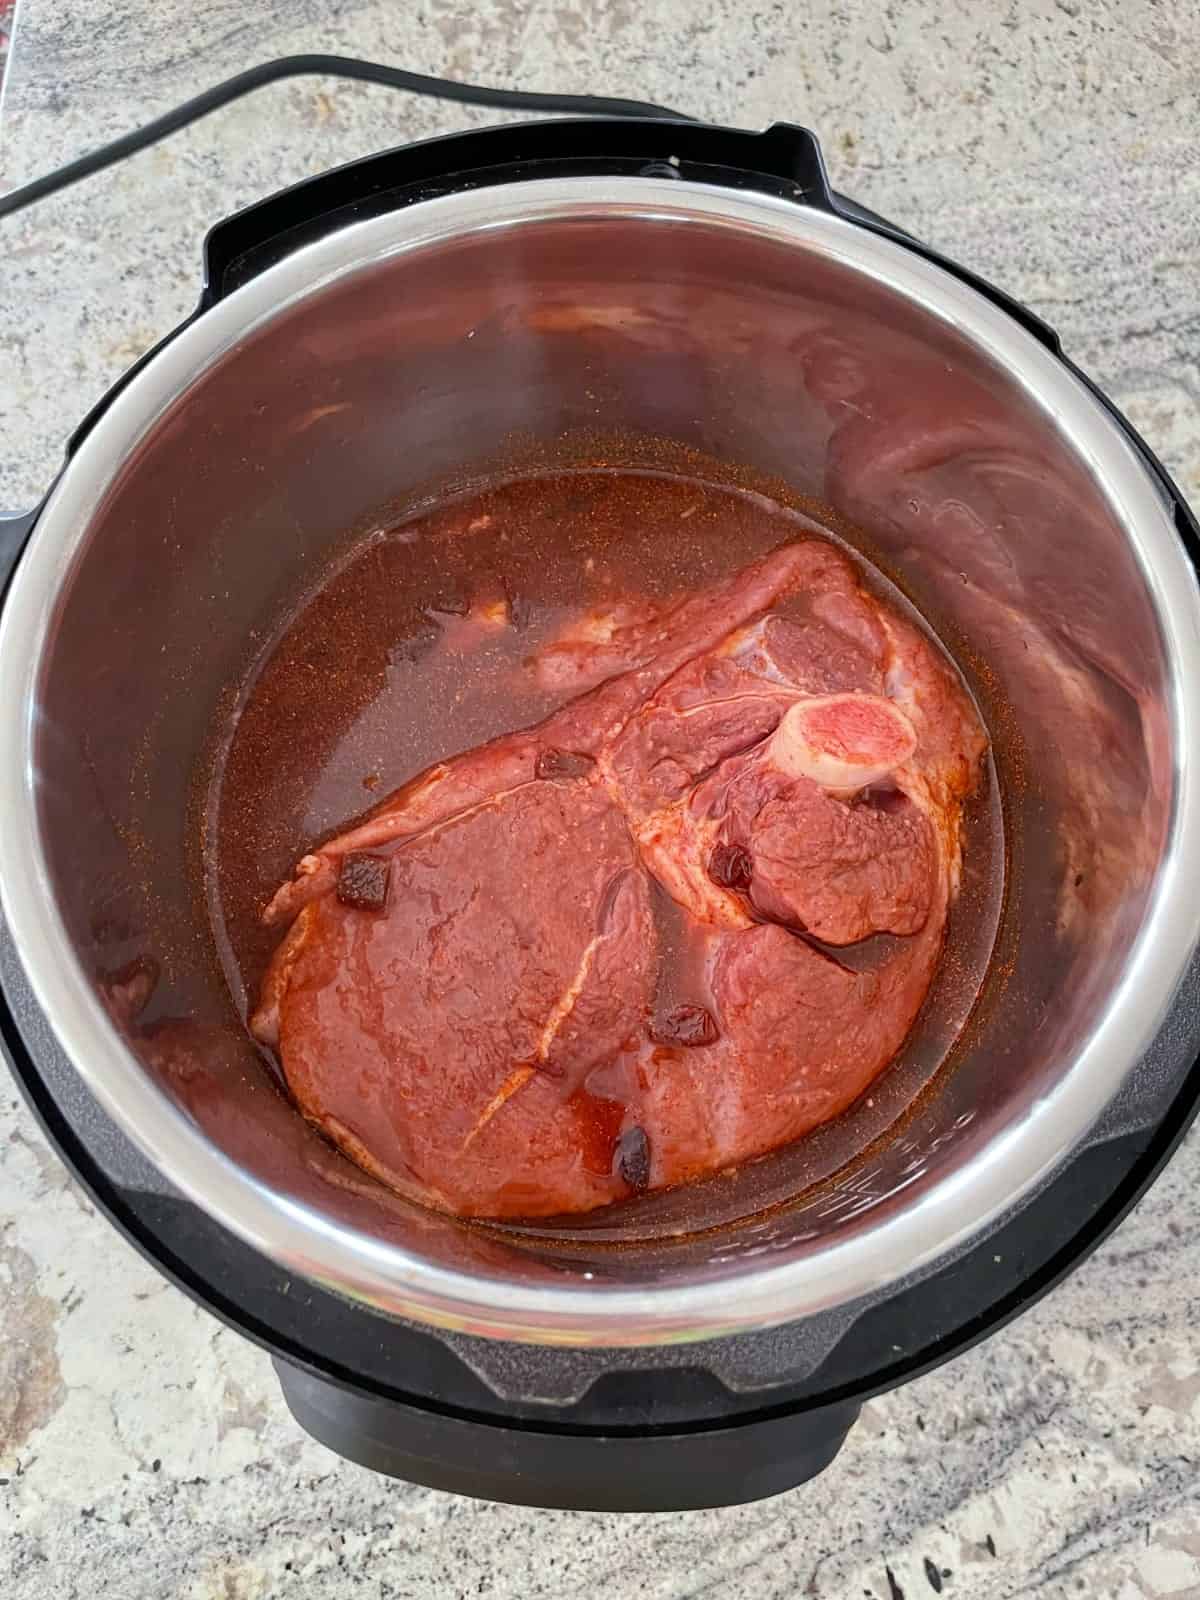 Uncooked pork shoulder smothered in cherry chipotle sauce in InstantPot pressure cooker.